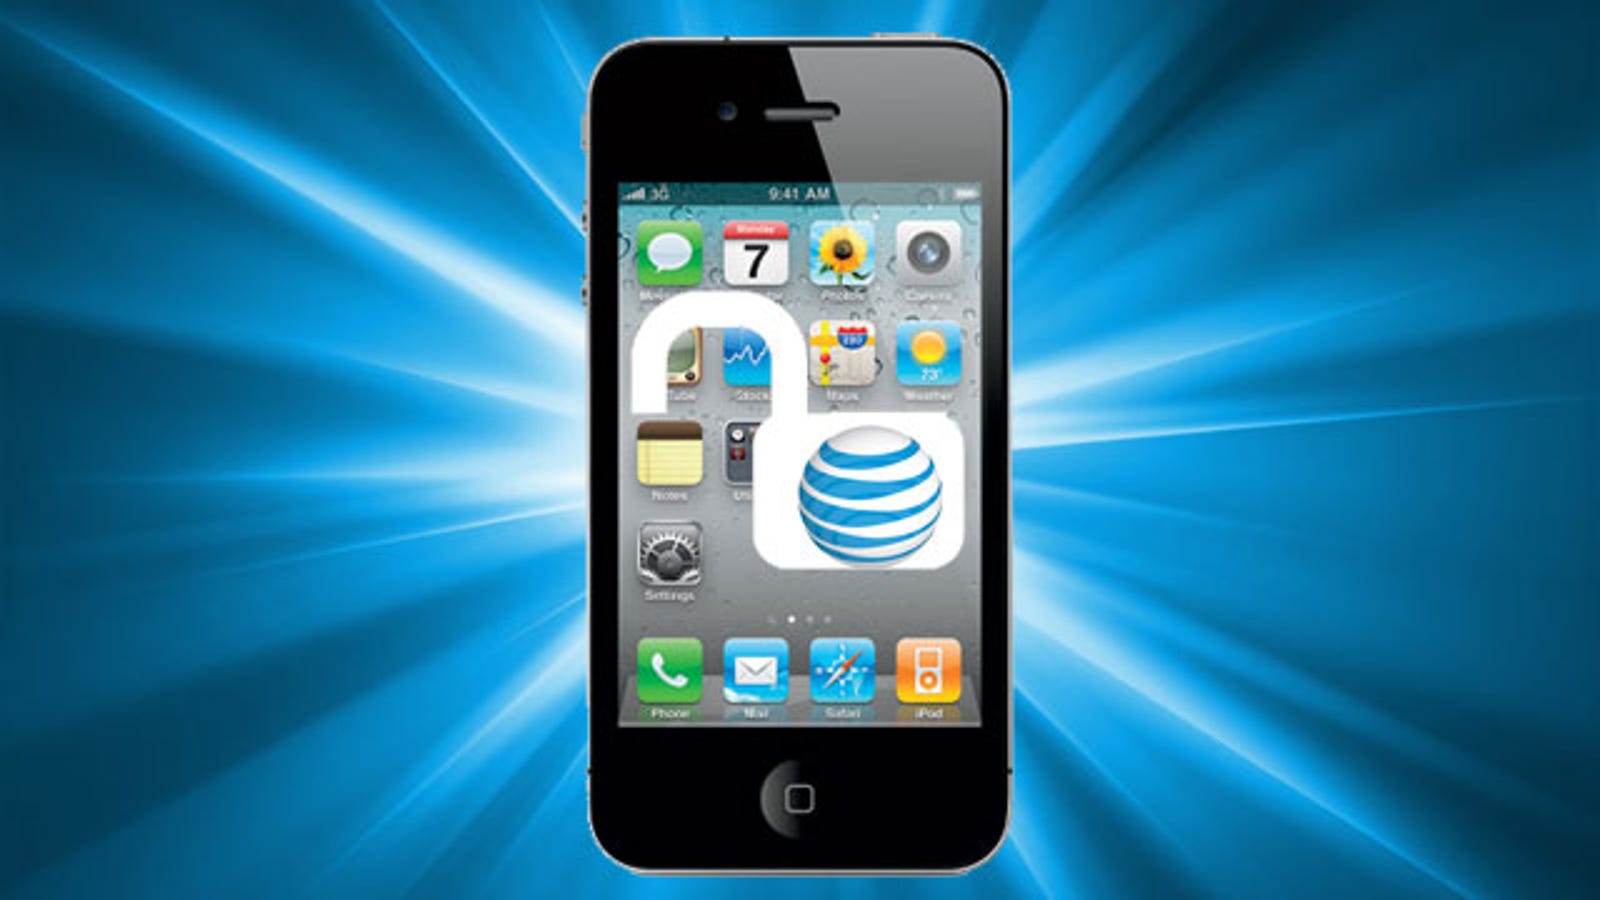 Unlock Your AT&T iPhone Without Losing Your Jailbreak